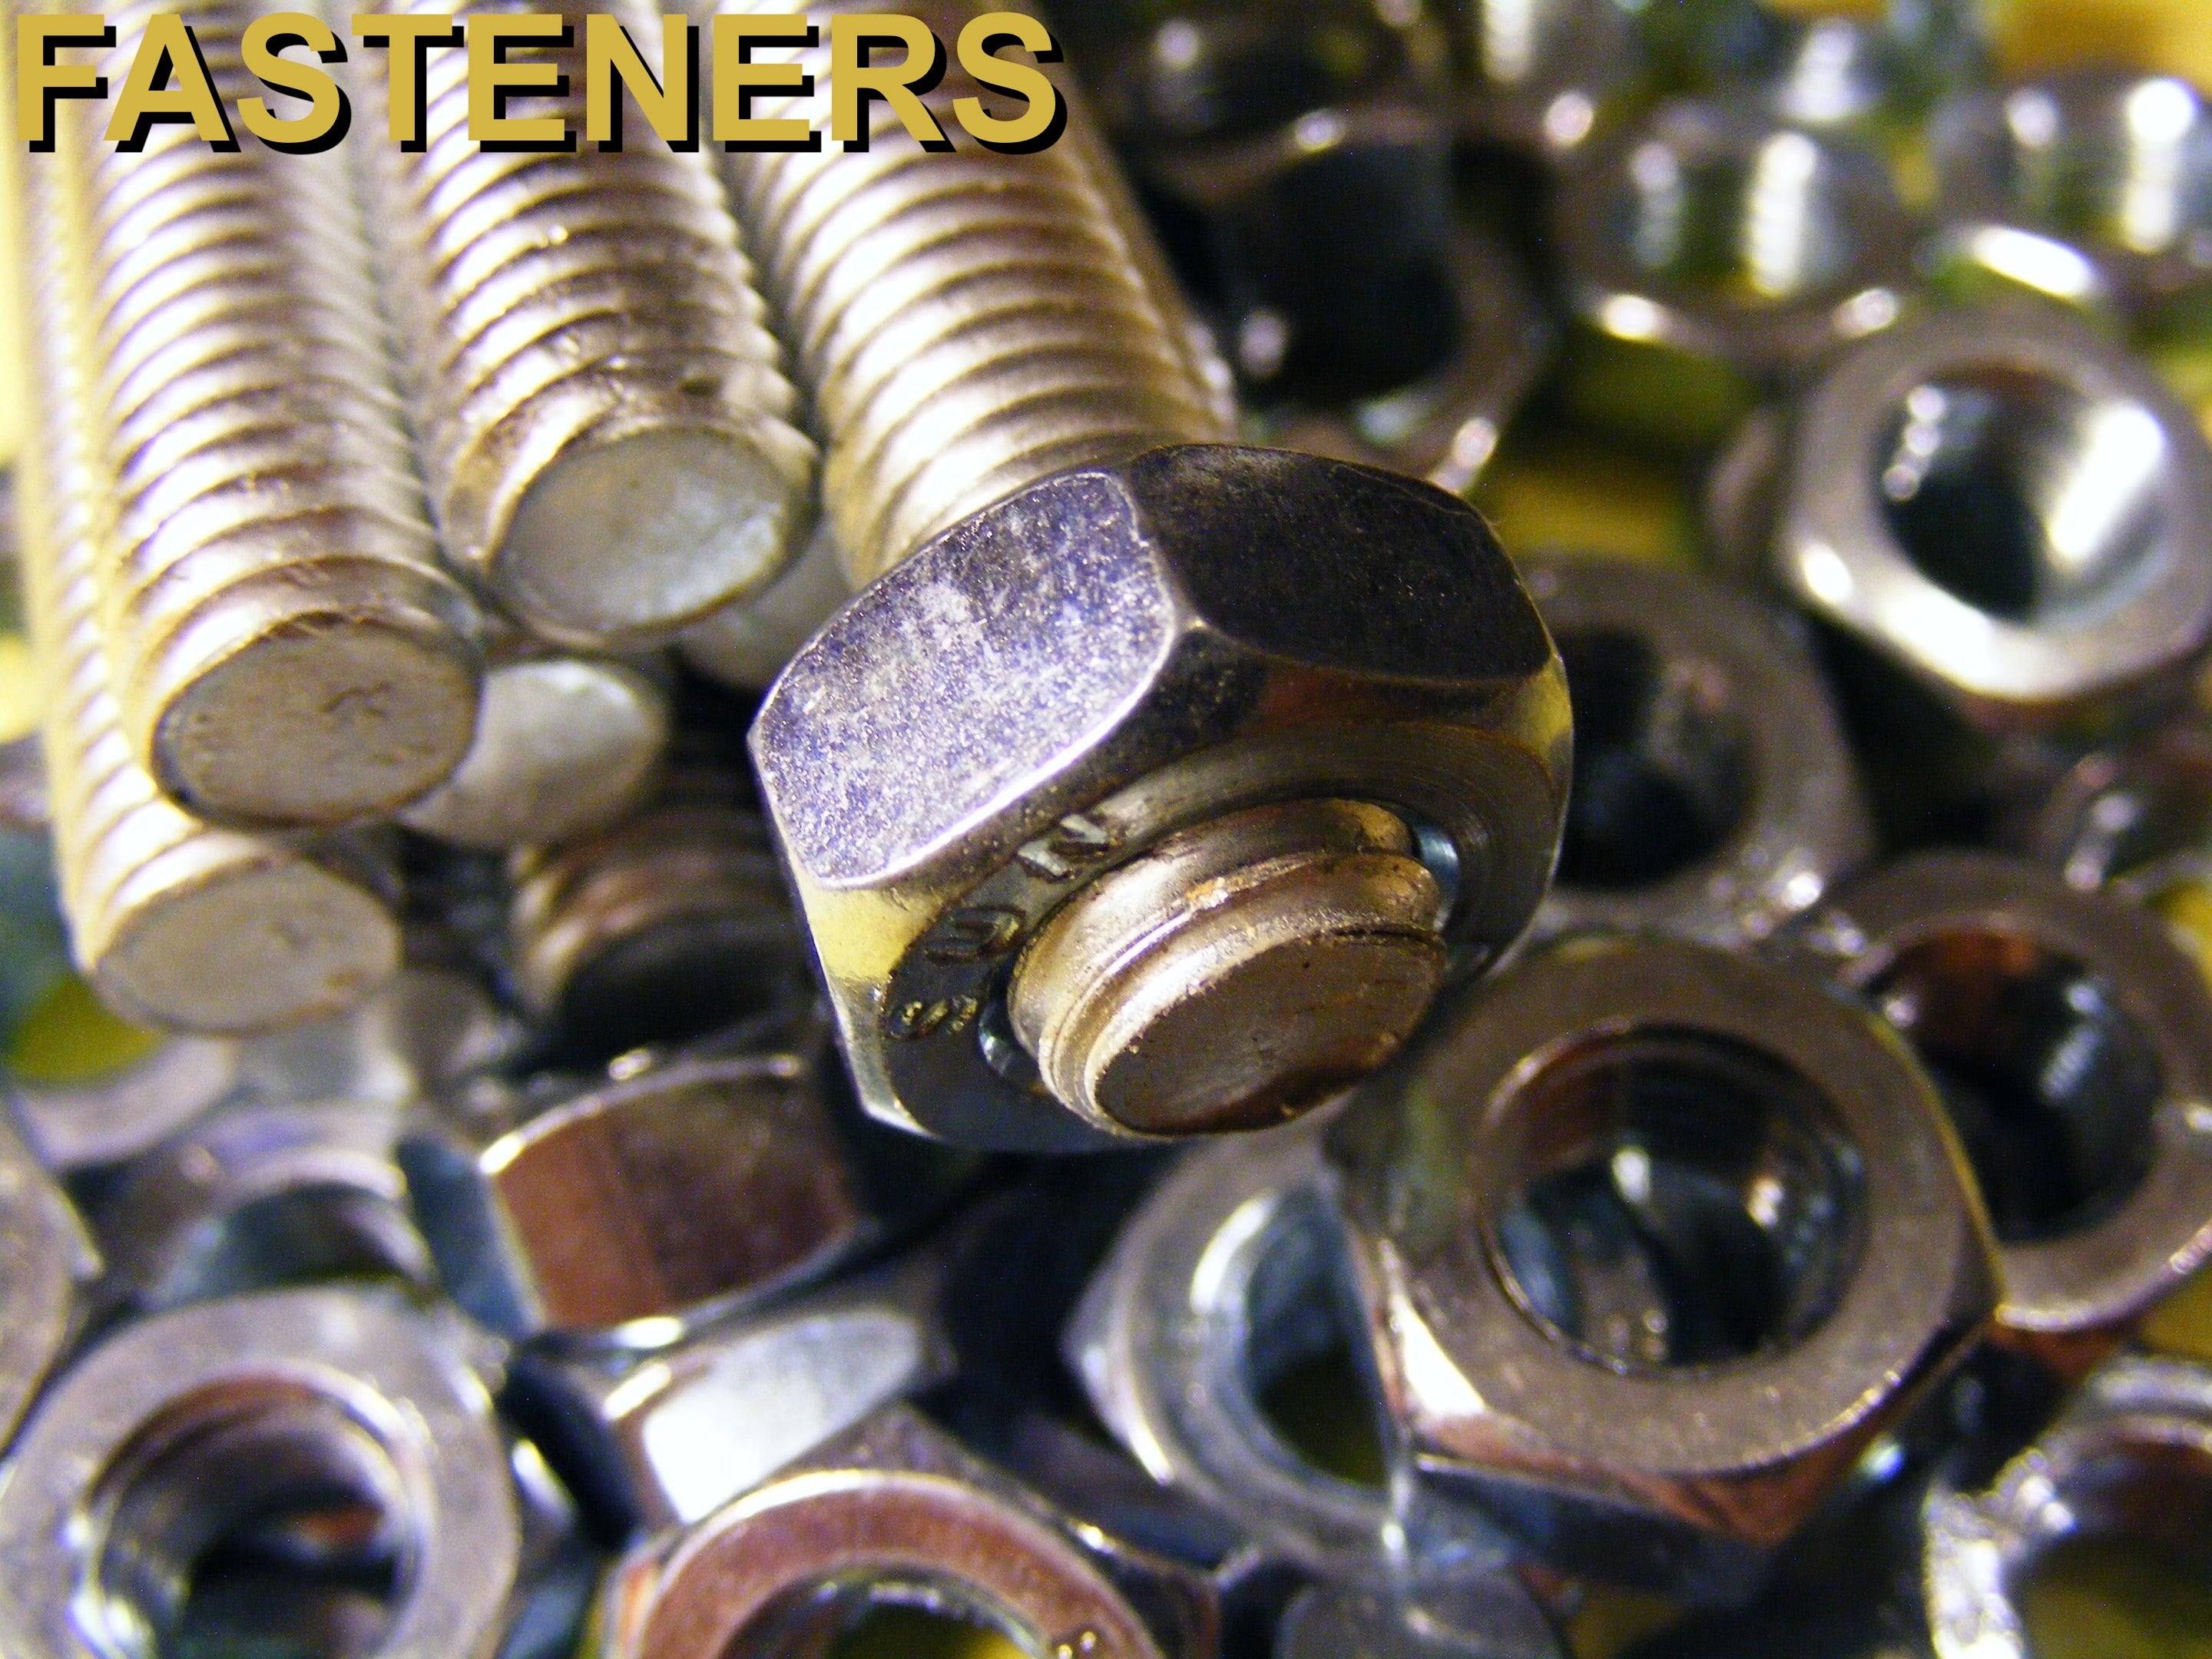 fasteners including: bolts, nuts and washers